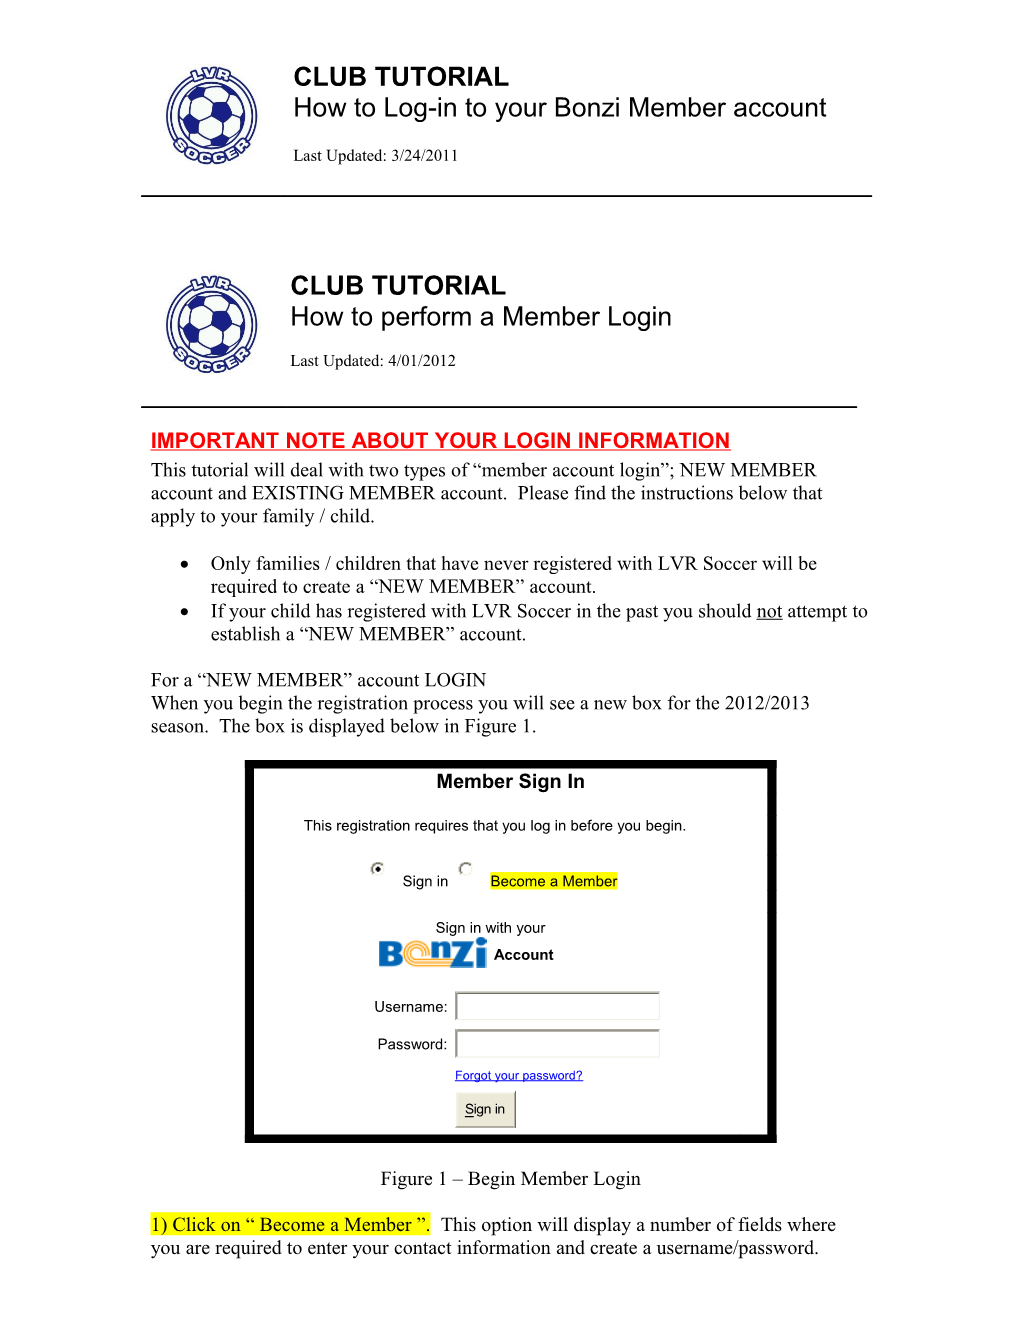 Important Note About Your Login Information